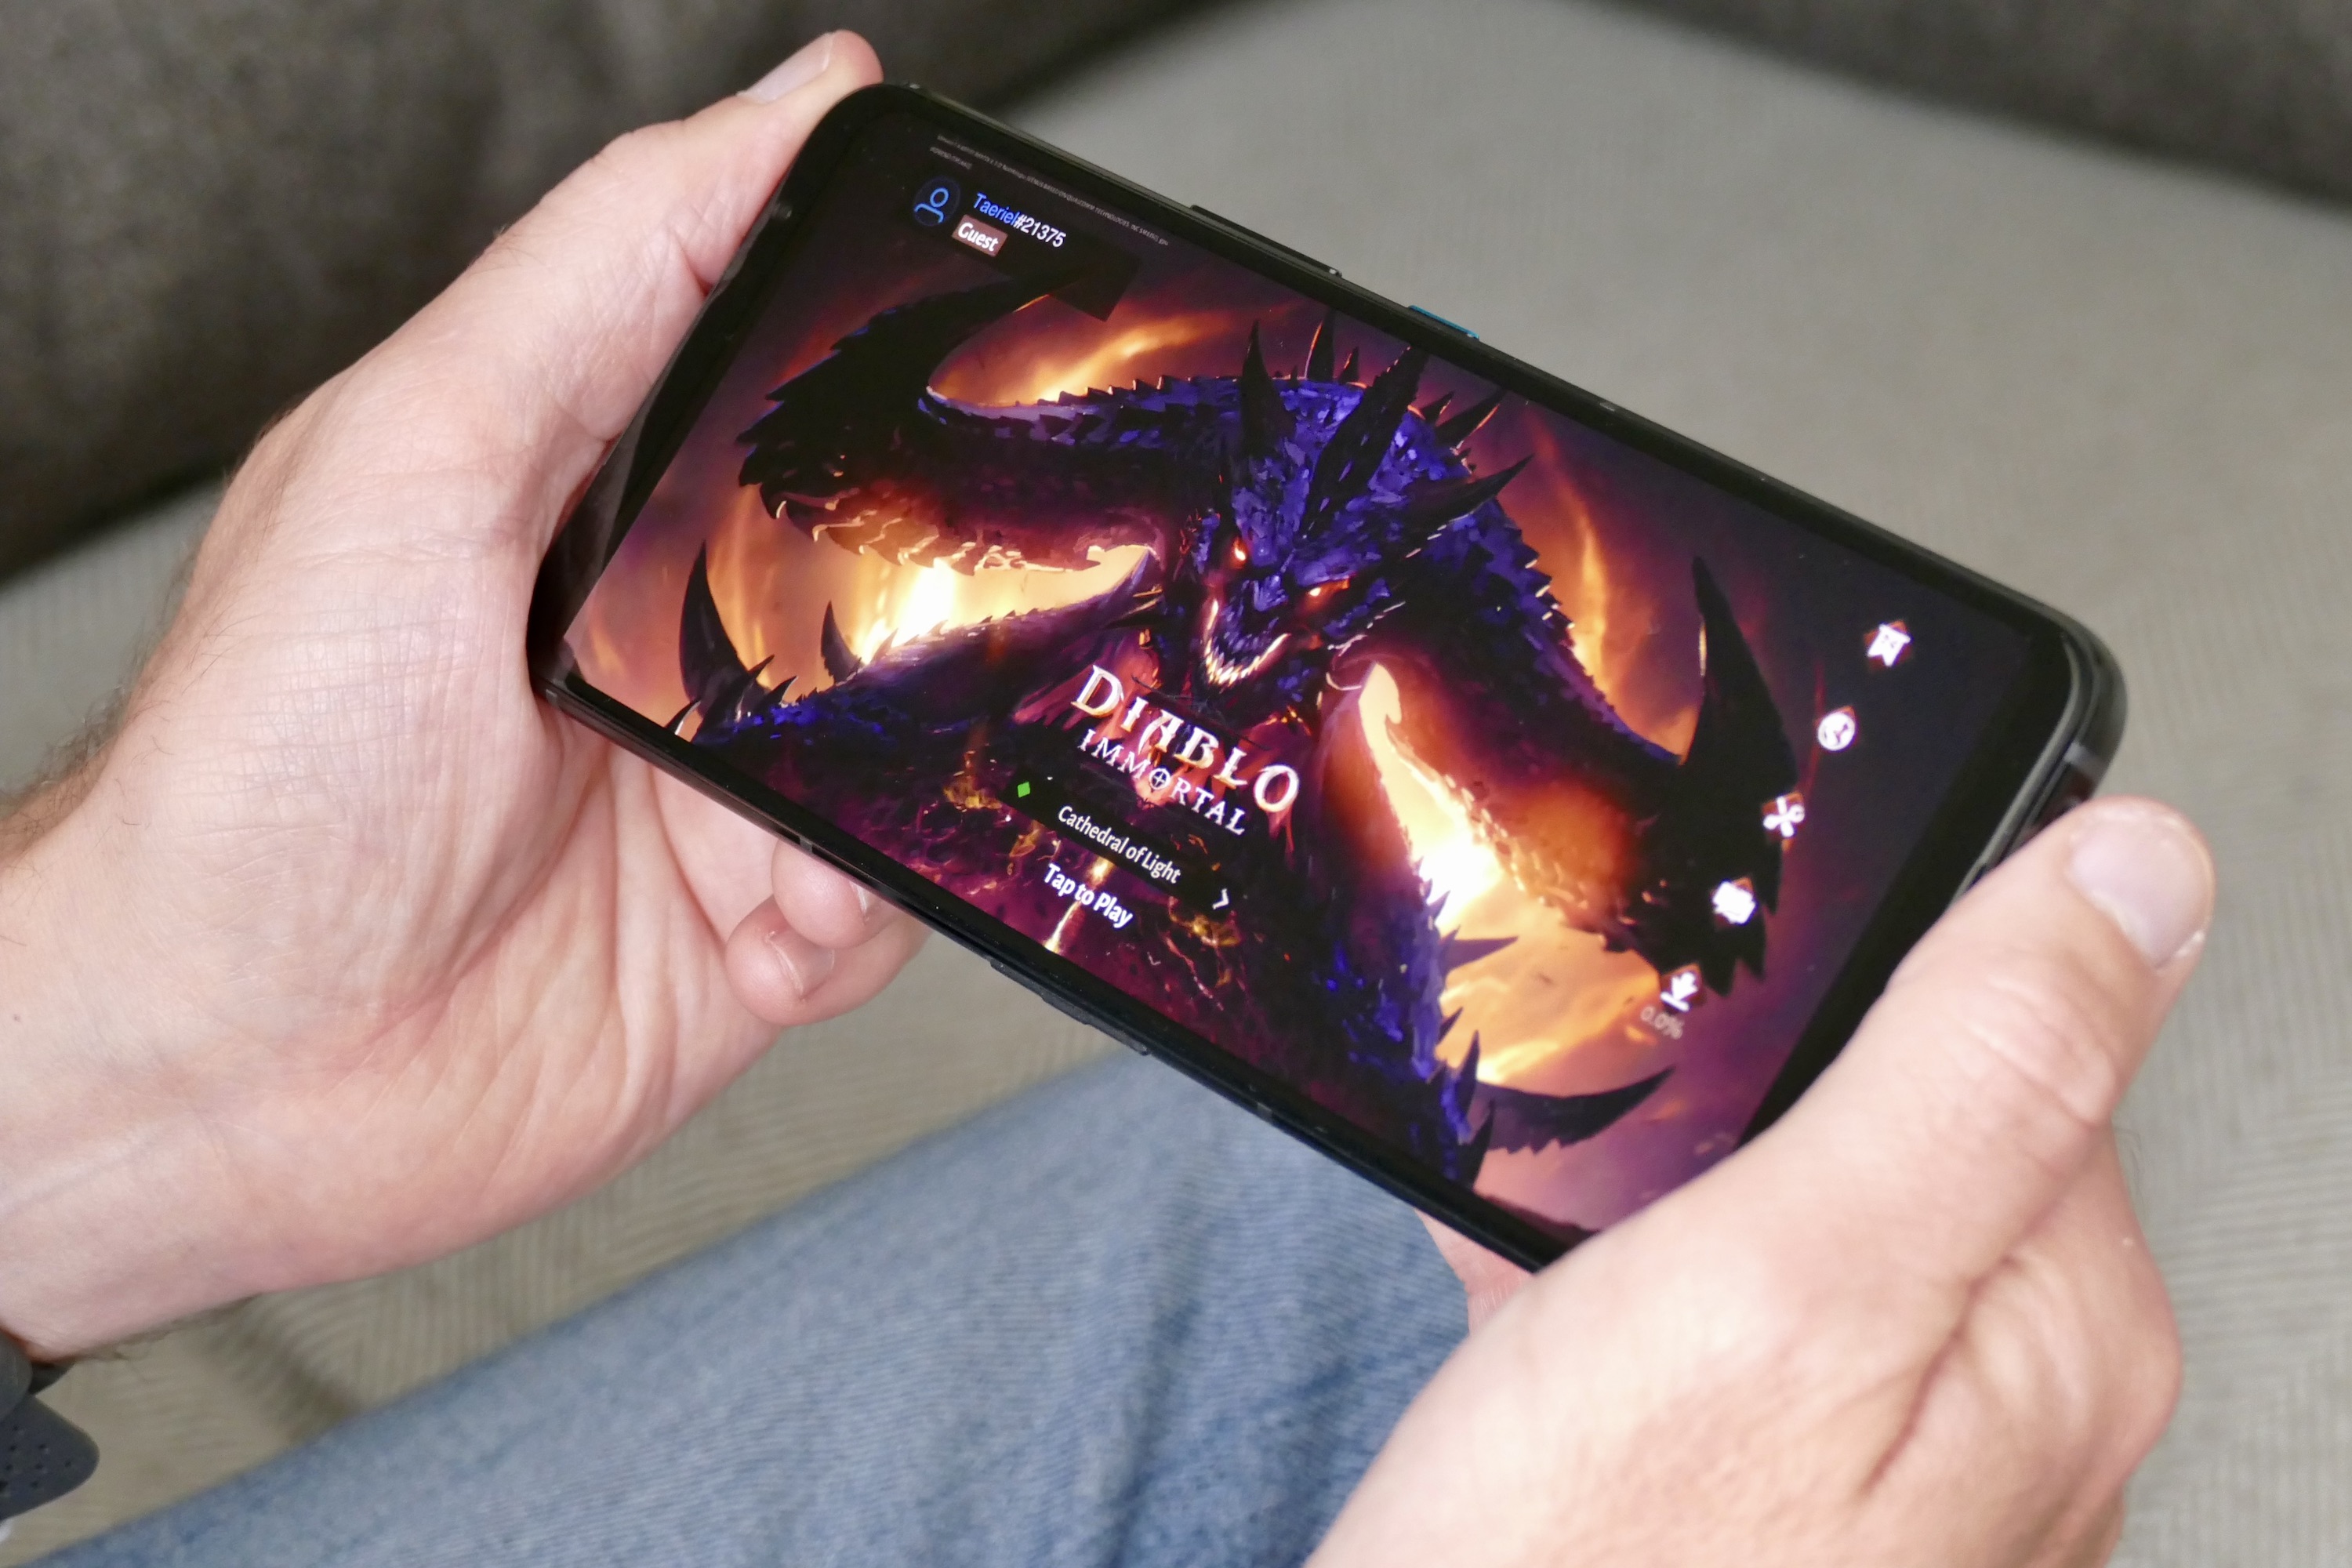 Diablo Immortal blazes past $500 million generated in its first year on  mobile